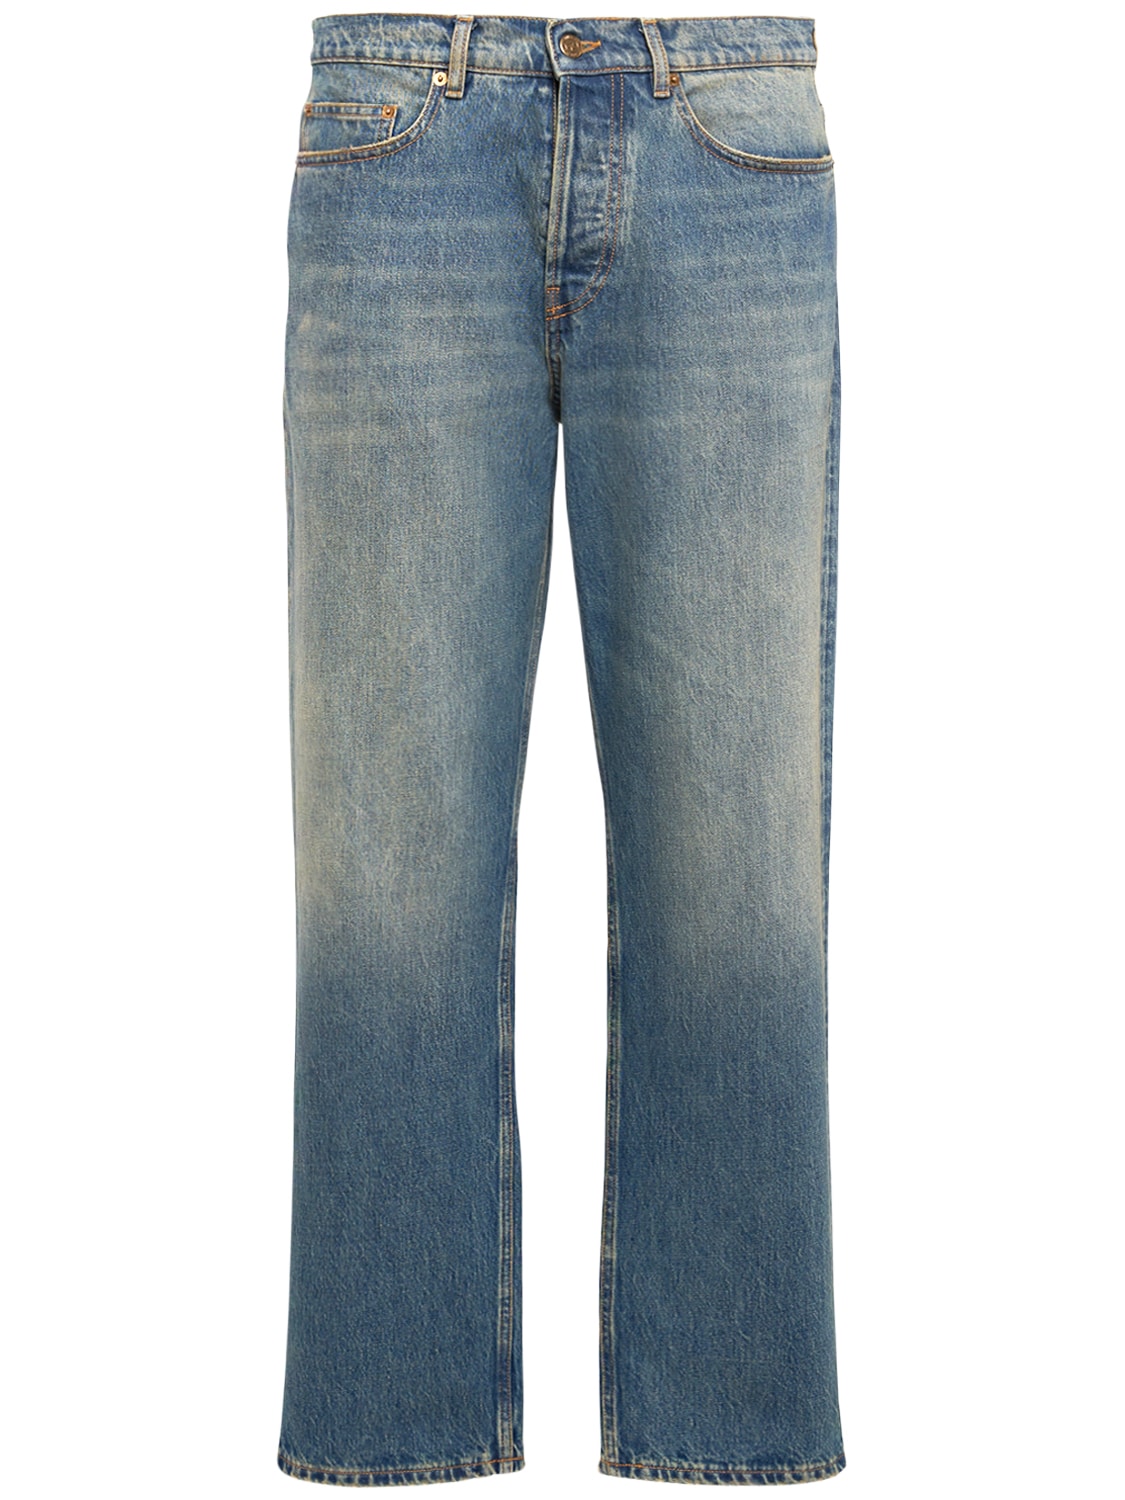 Image of Journey Dirty Wash Cotton Denim Jeans